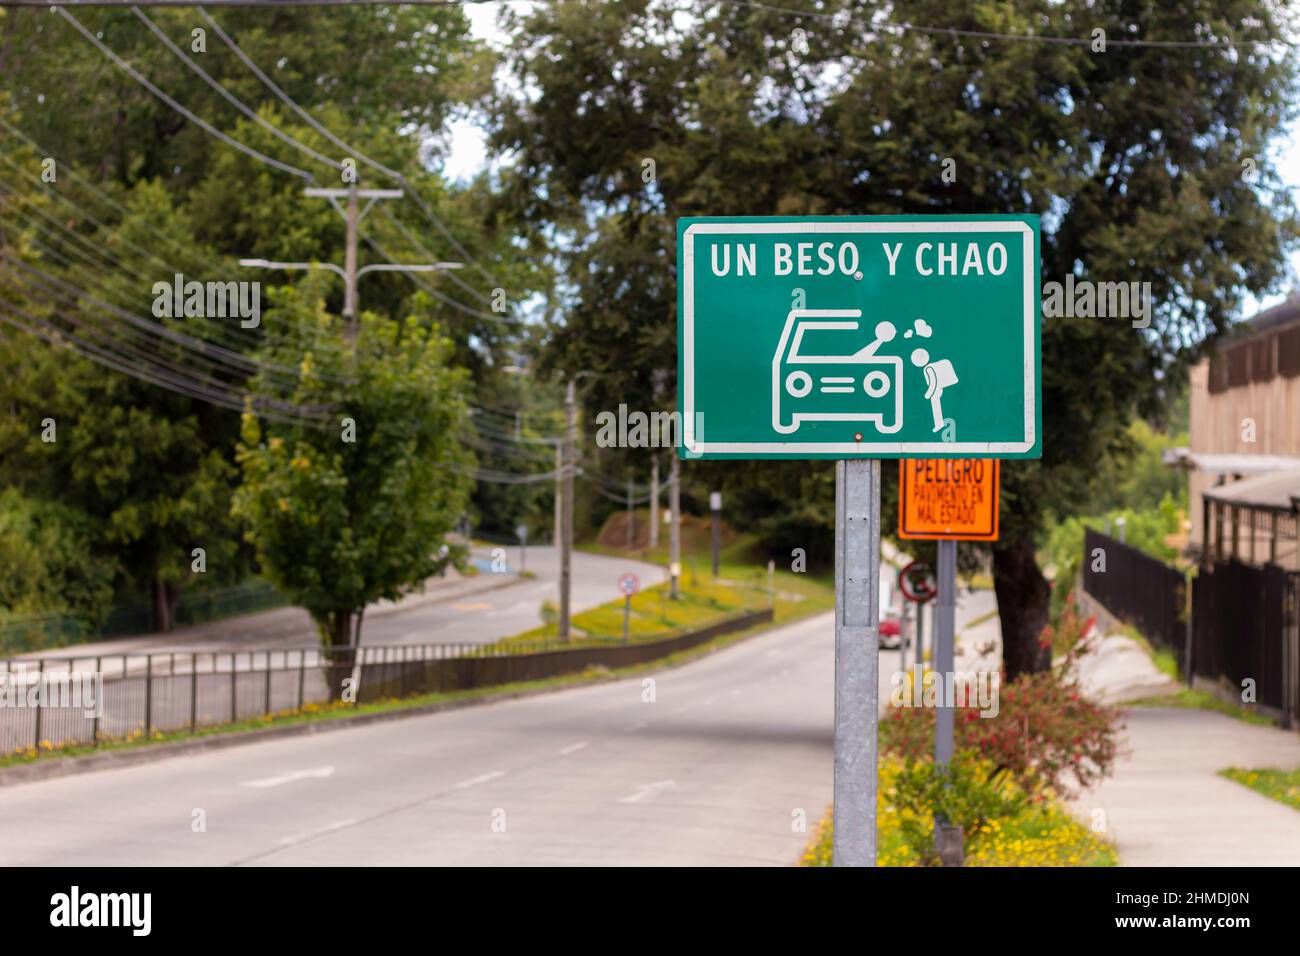 A kiss and goodbye road sign near a school on Valdivia, Chile Stock Photo